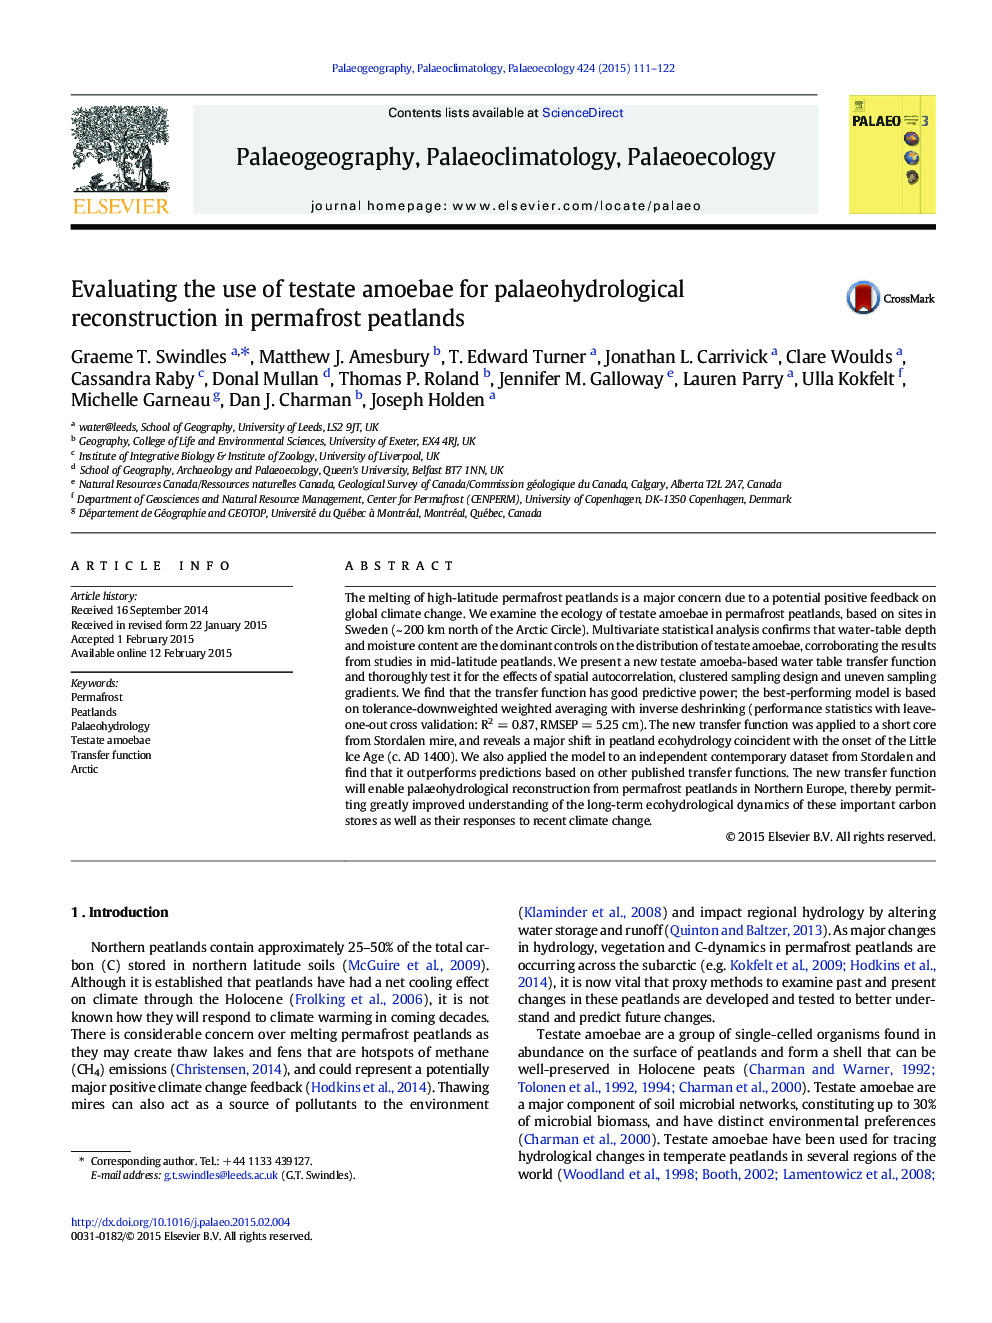 Evaluating the use of testate amoebae for palaeohydrological reconstruction in permafrost peatlands